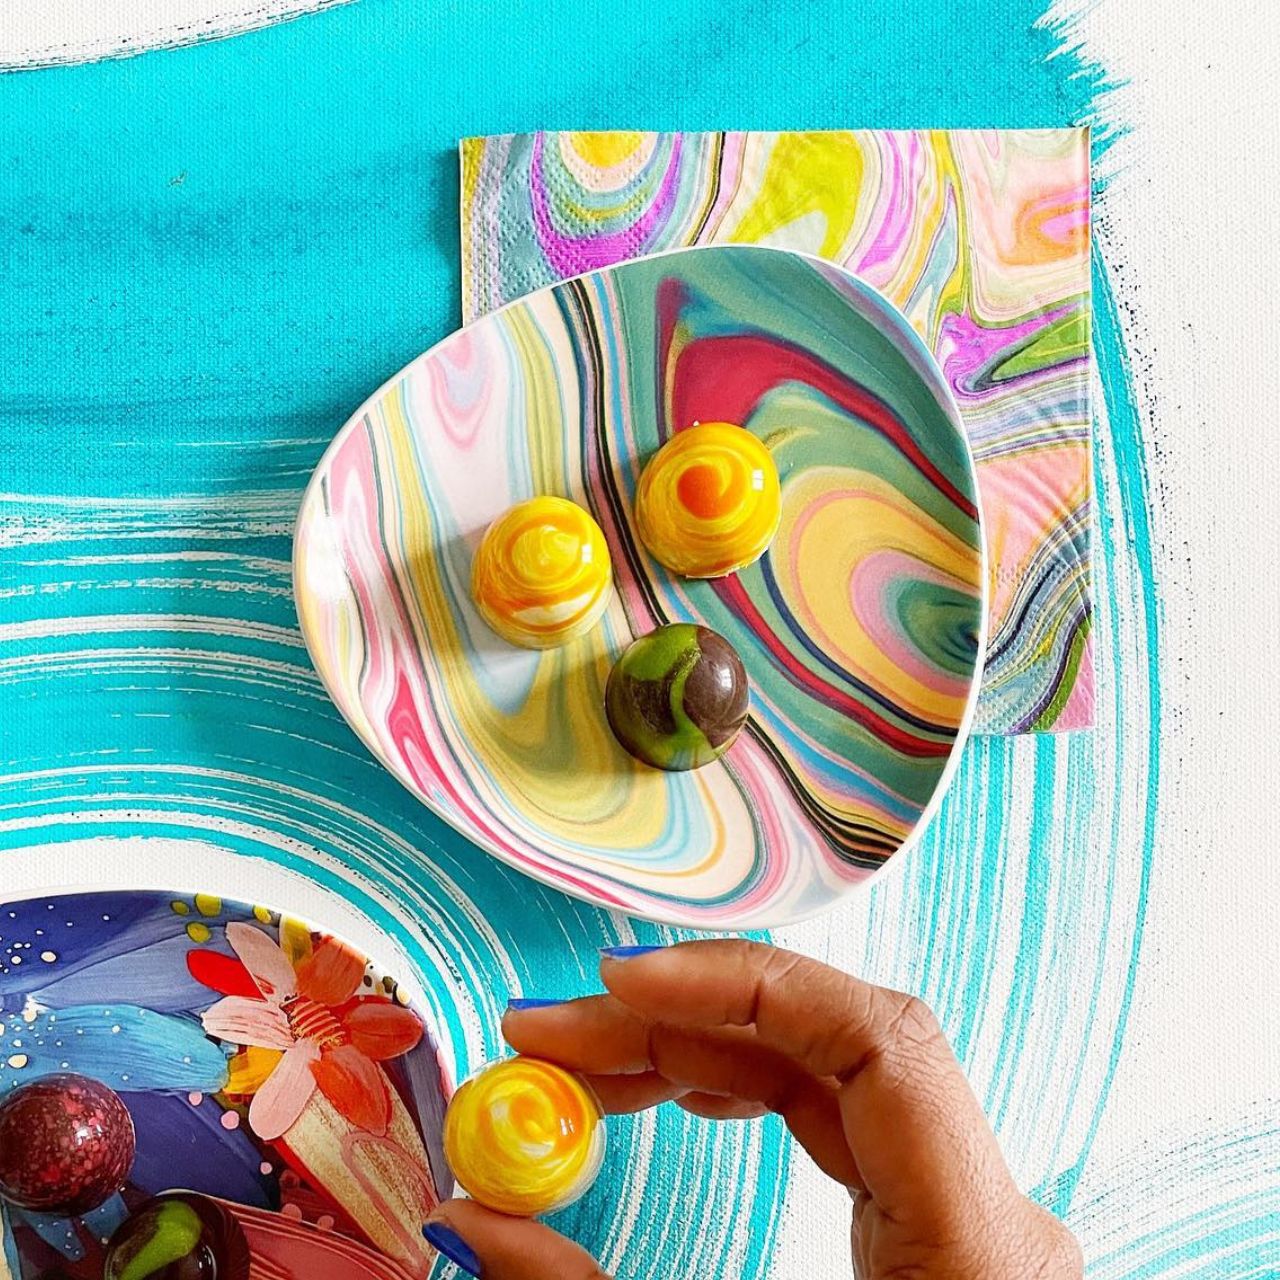 Jessi's Garden In the Groove Trinket Tray by Etta Vee  Artist, designer and art influencer, Jessi Raulet, is known for her colourful and bold designs. This multi purpose tray is suitable for jewellery, keys, and more. 